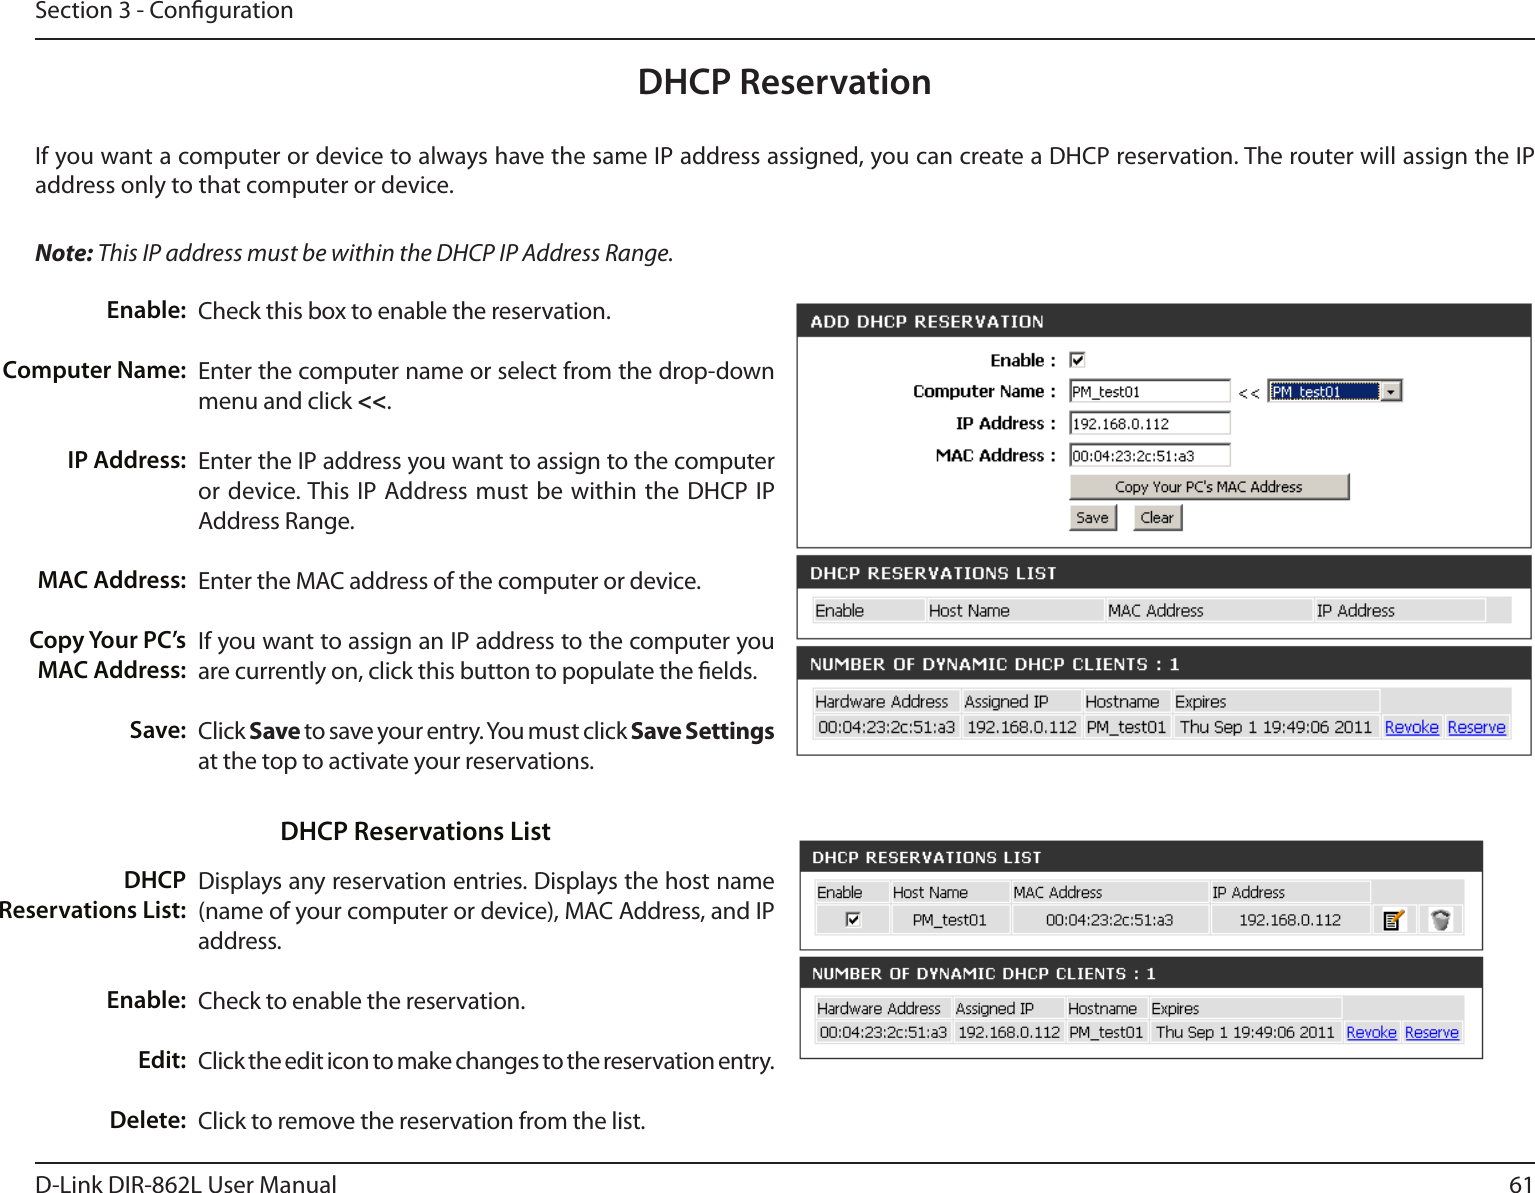 61D-Link DIR-862L User ManualSection 3 - CongurationDHCP ReservationIf you want a computer or device to always have the same IP address assigned, you can create a DHCP reservation. The router will assign the IP address only to that computer or device. Note: This IP address must be within the DHCP IP Address Range.Check this box to enable the reservation.Enter the computer name or select from the drop-down menu and click &lt;&lt;.Enter the IP address you want to assign to the computer or device. This IP Address must be within the DHCP IP Address Range.Enter the MAC address of the computer or device.If you want to assign an IP address to the computer you are currently on, click this button to populate the elds. Click Save to save your entry. You must click Save Settings at the top to activate your reservations. Displays any reservation entries. Displays the host name (name of your computer or device), MAC Address, and IP address.Check to enable the reservation.Click the edit icon to make changes to the reservation entry.Click to remove the reservation from the list.Enable:Computer Name:IP Address:MAC Address:Copy Your PC’s MAC Address:Save:DHCP Reservations List:Enable:Edit:Delete:DHCP Reservations List